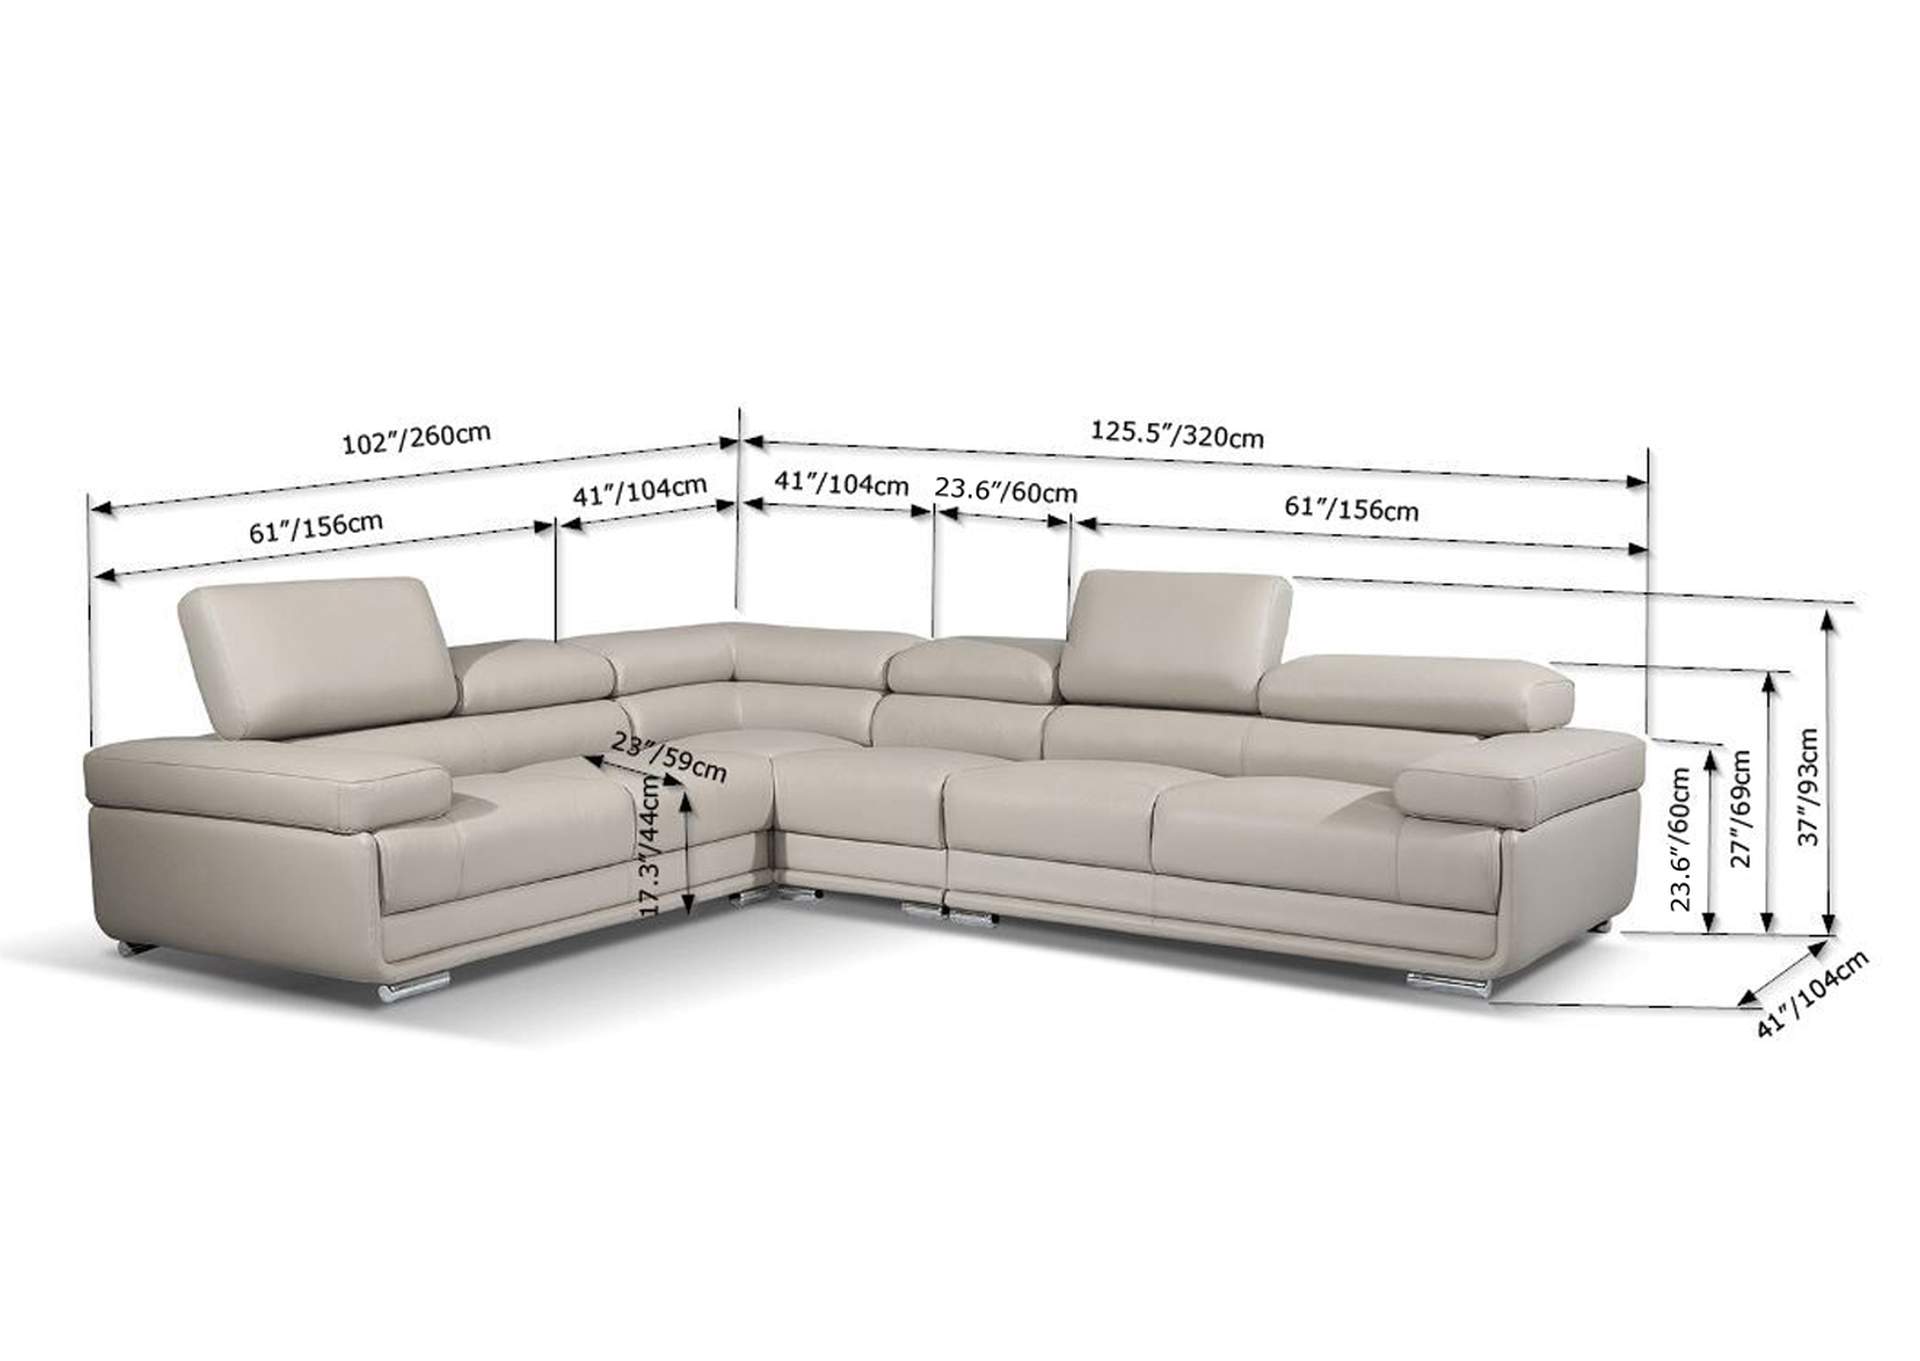 2119 Sectional Left Or Right,ESF Wholesale Furniture